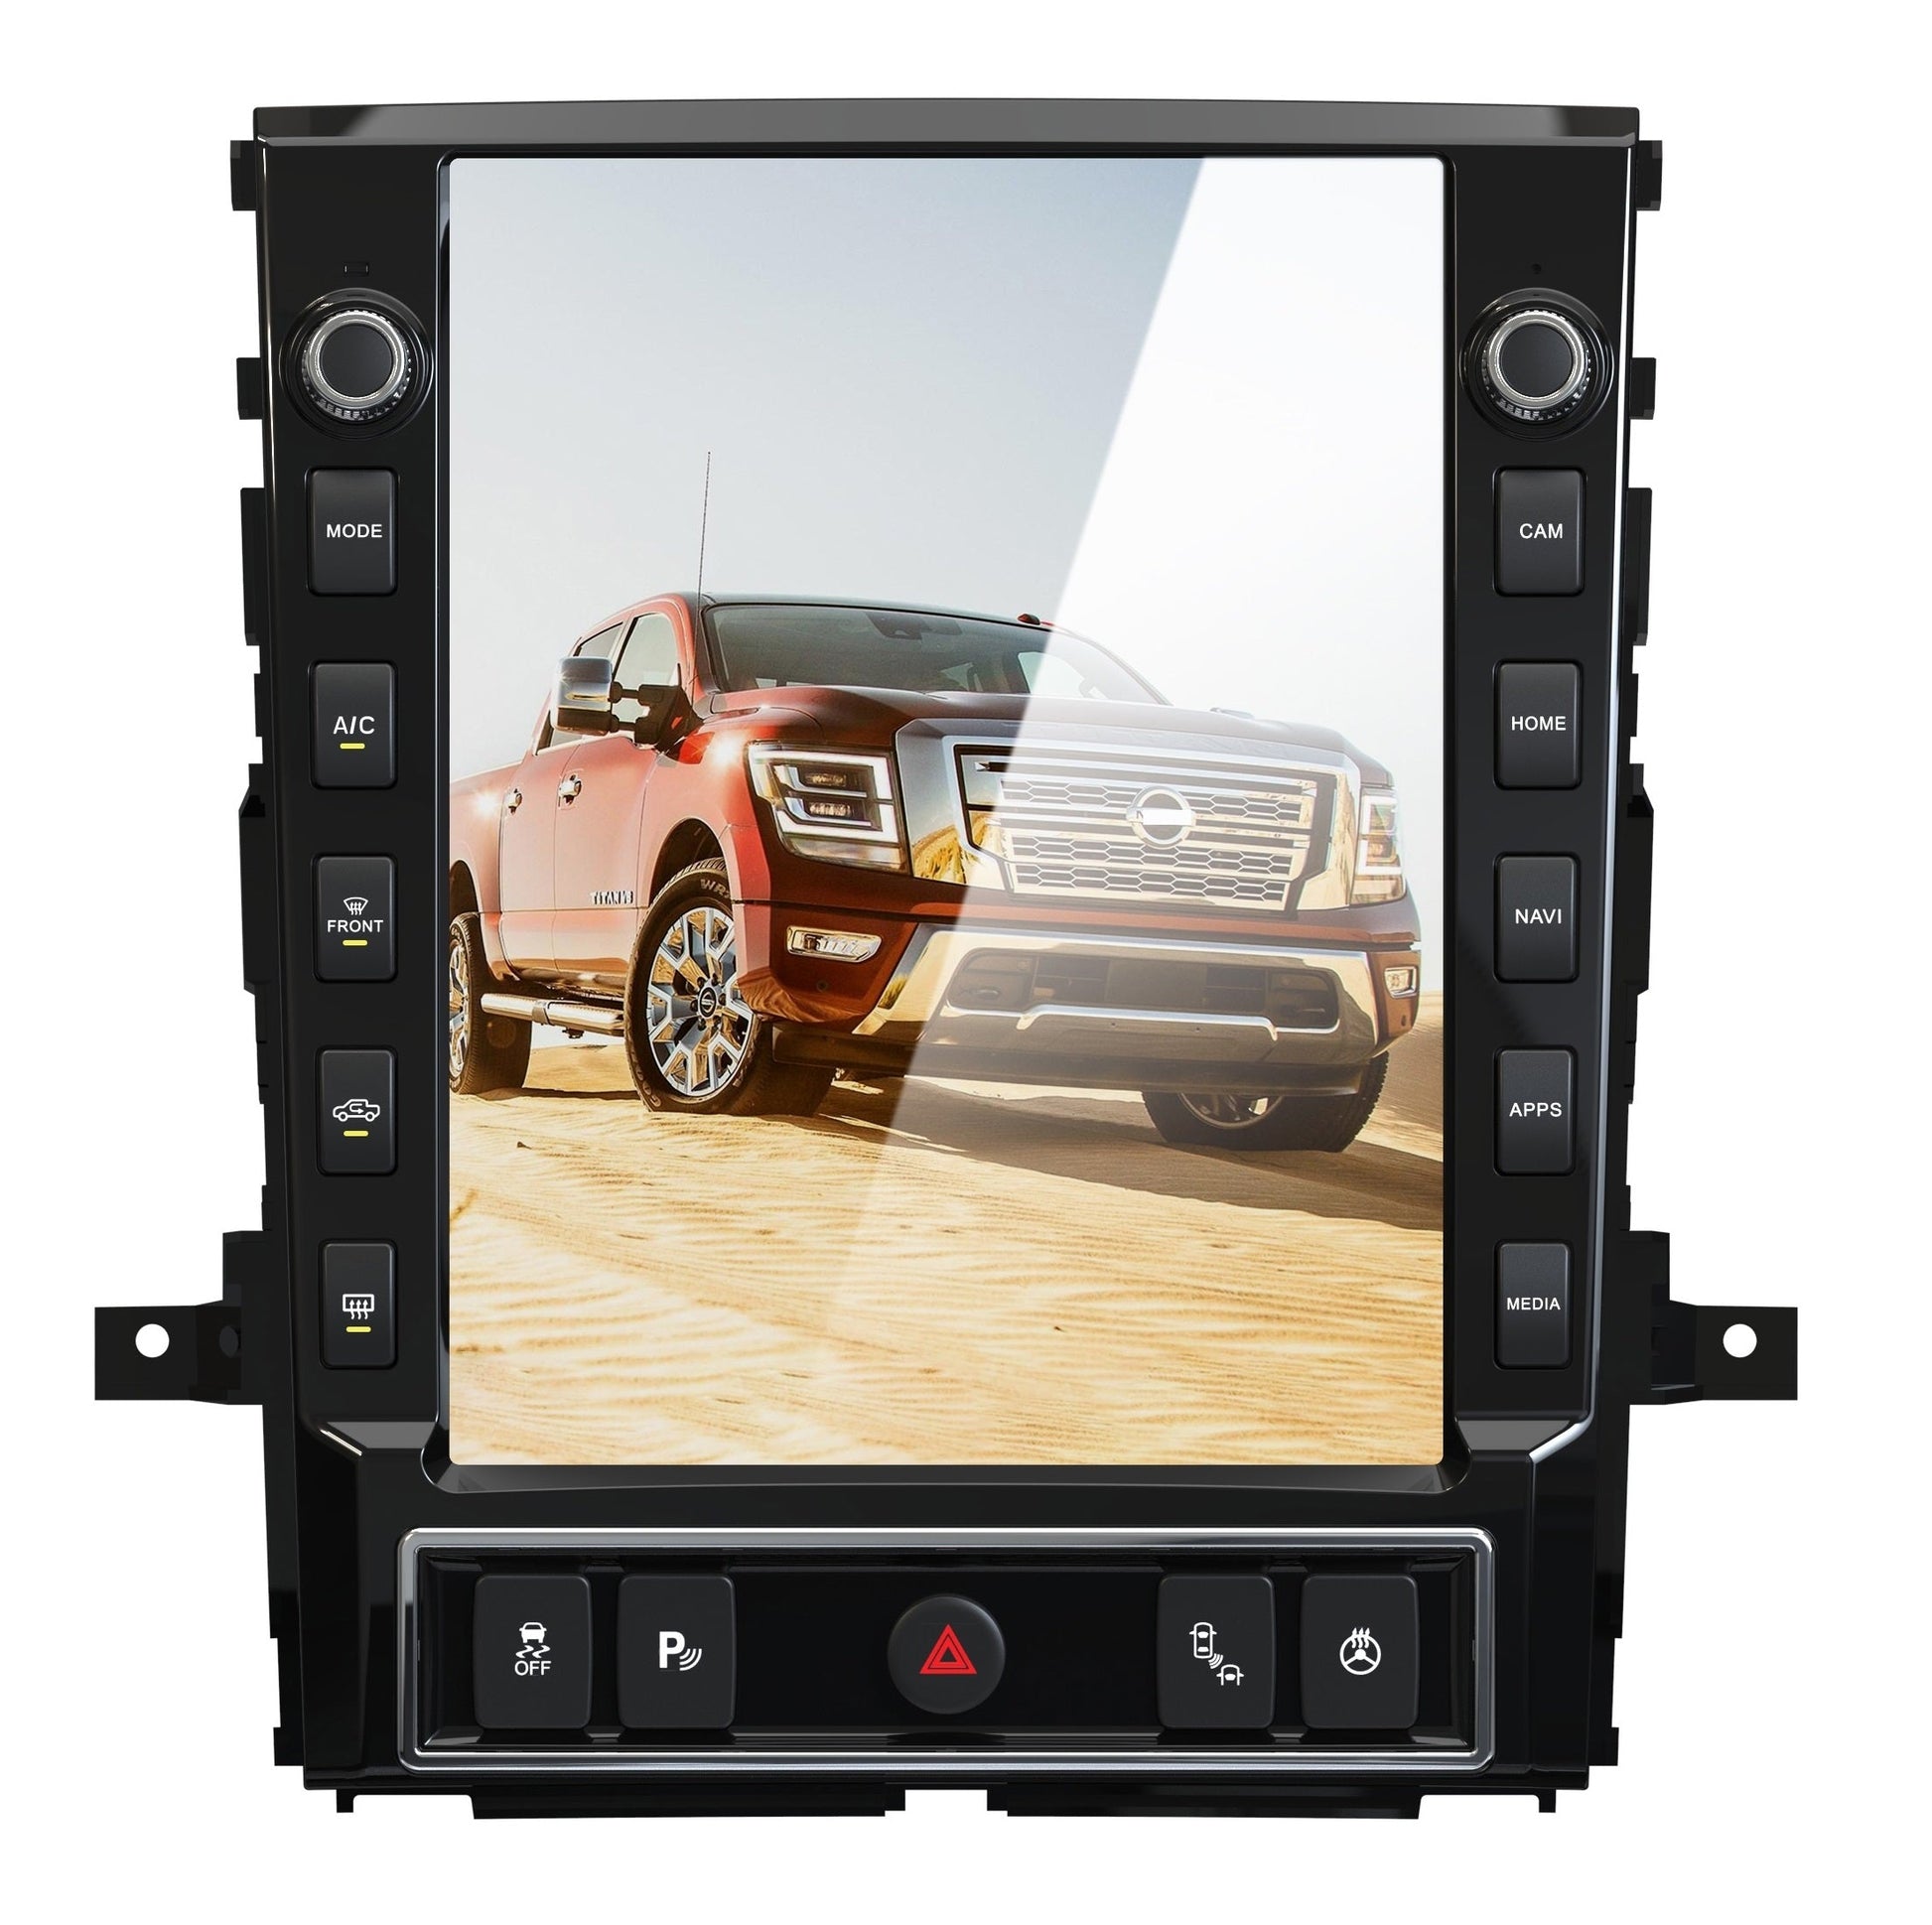 13” Android 12 Vertical Screen Navigation Radio for Nissan Titan (XD) 2020 - 2021 - Smart Car Stereo Radio Navigation | In-Dash audio/video players online - Phoenix Automotive